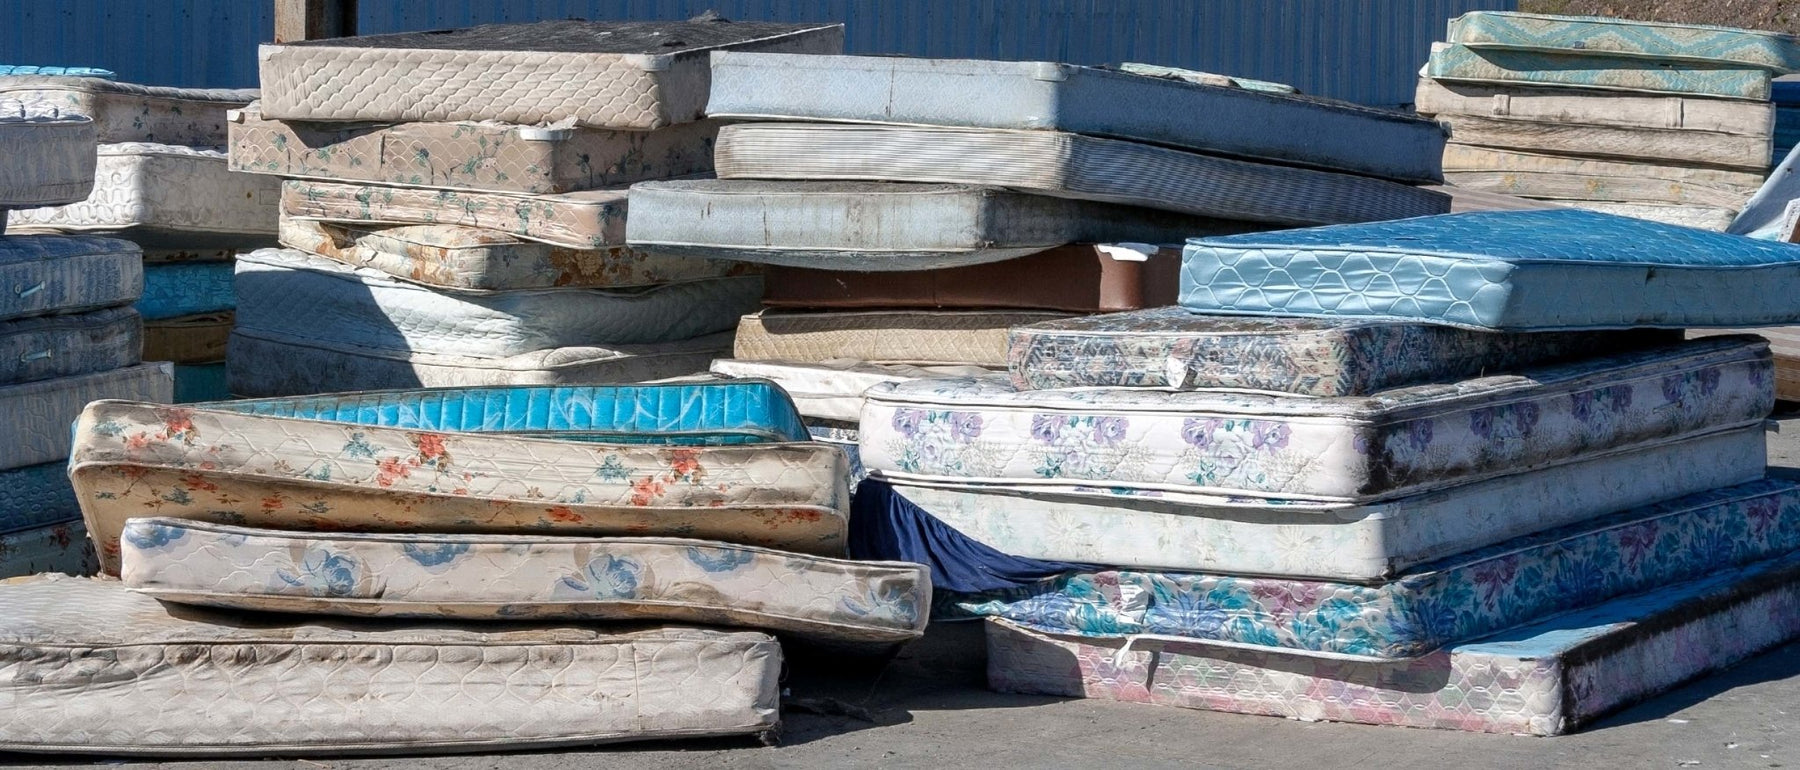 Choosing The Right Mattress For Your Needs